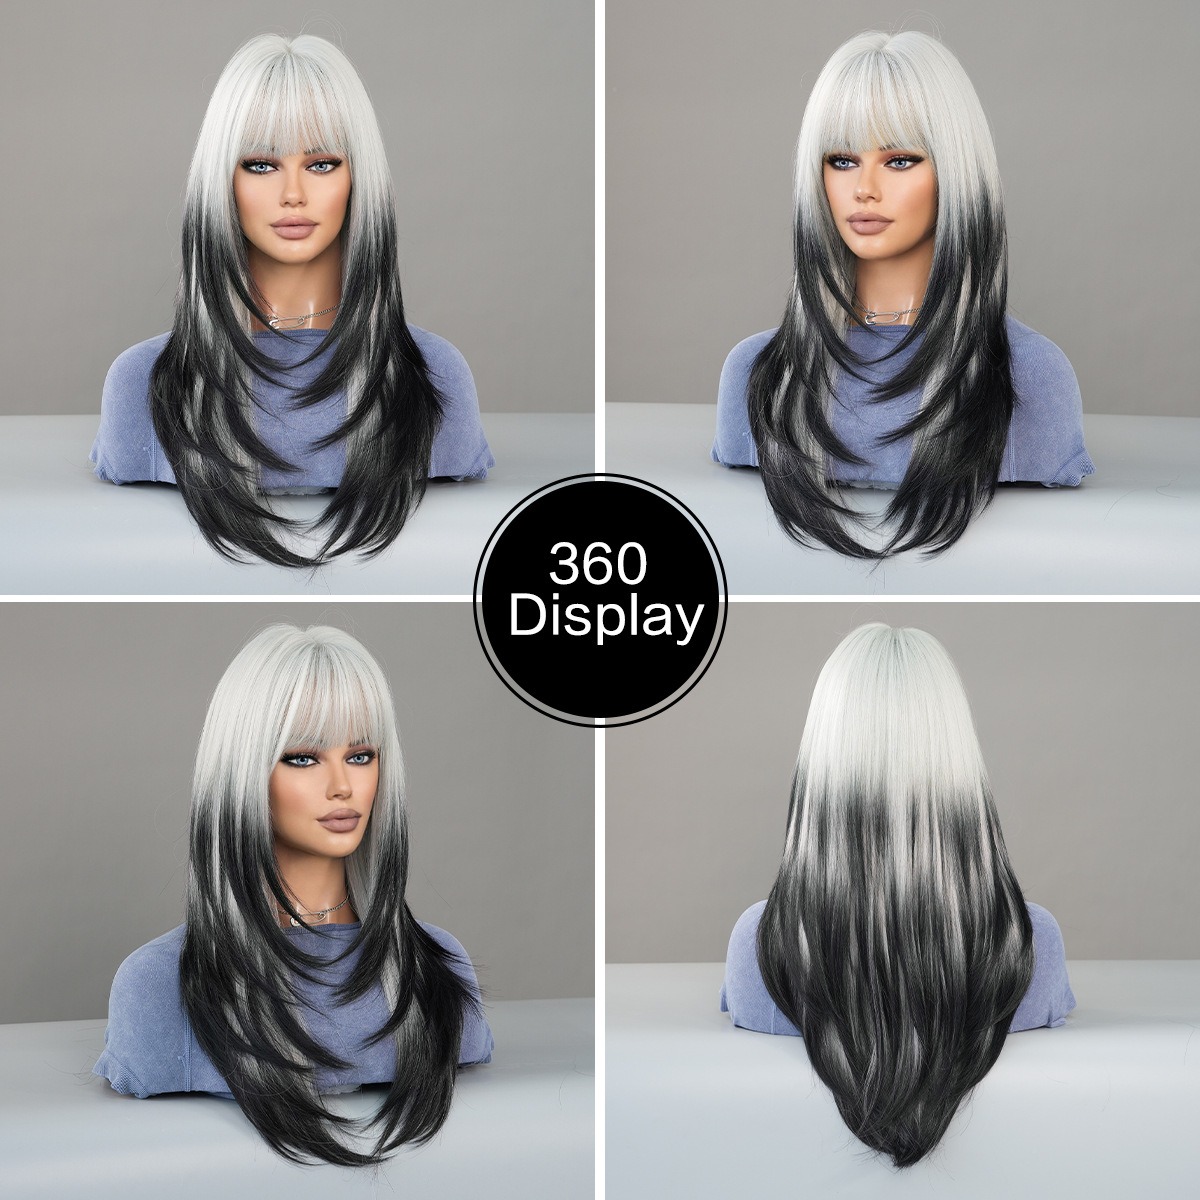 Synthetic wig in silver gradient black, styled for a party with long straight hair